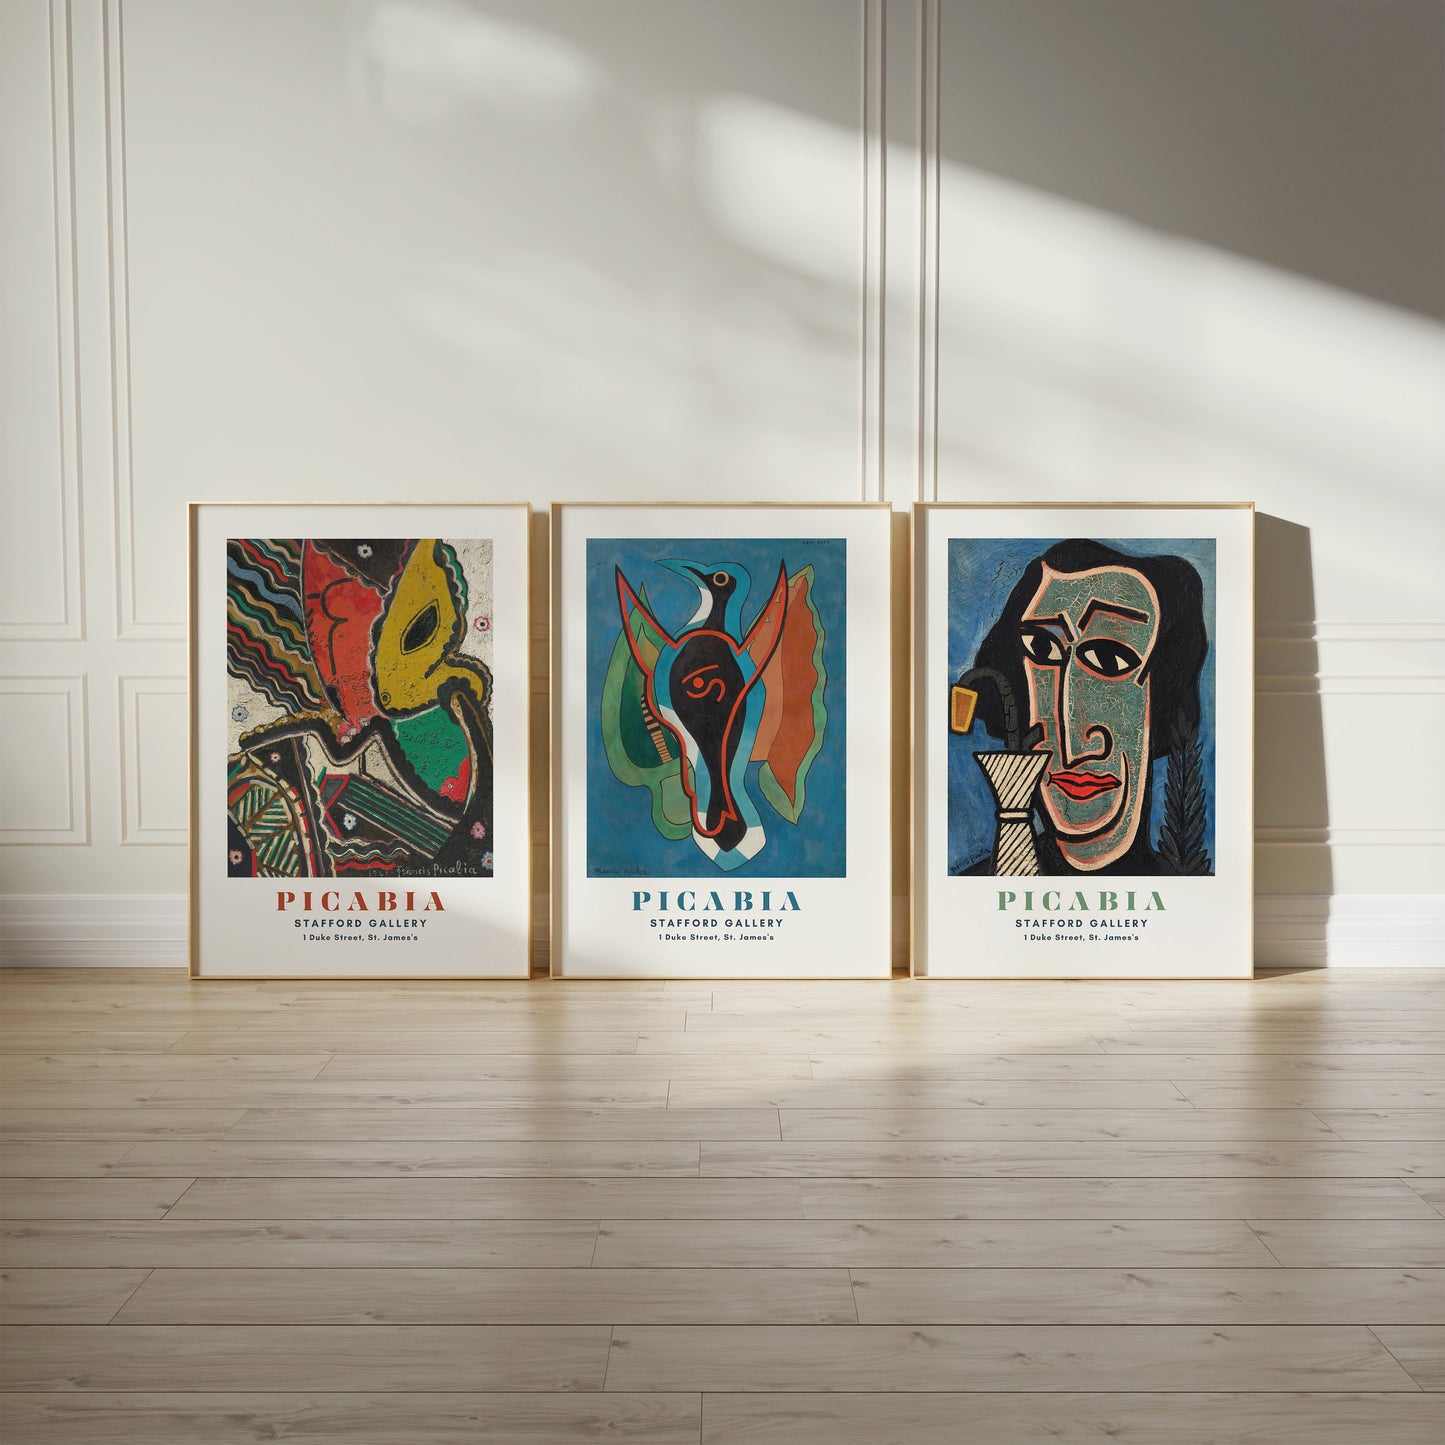 Set of 3 Francis Picabia Abstract Colorful Exhibition Modern Print Vintage Museum Eclectic Posters Ready to hang Framed Home Office Decor